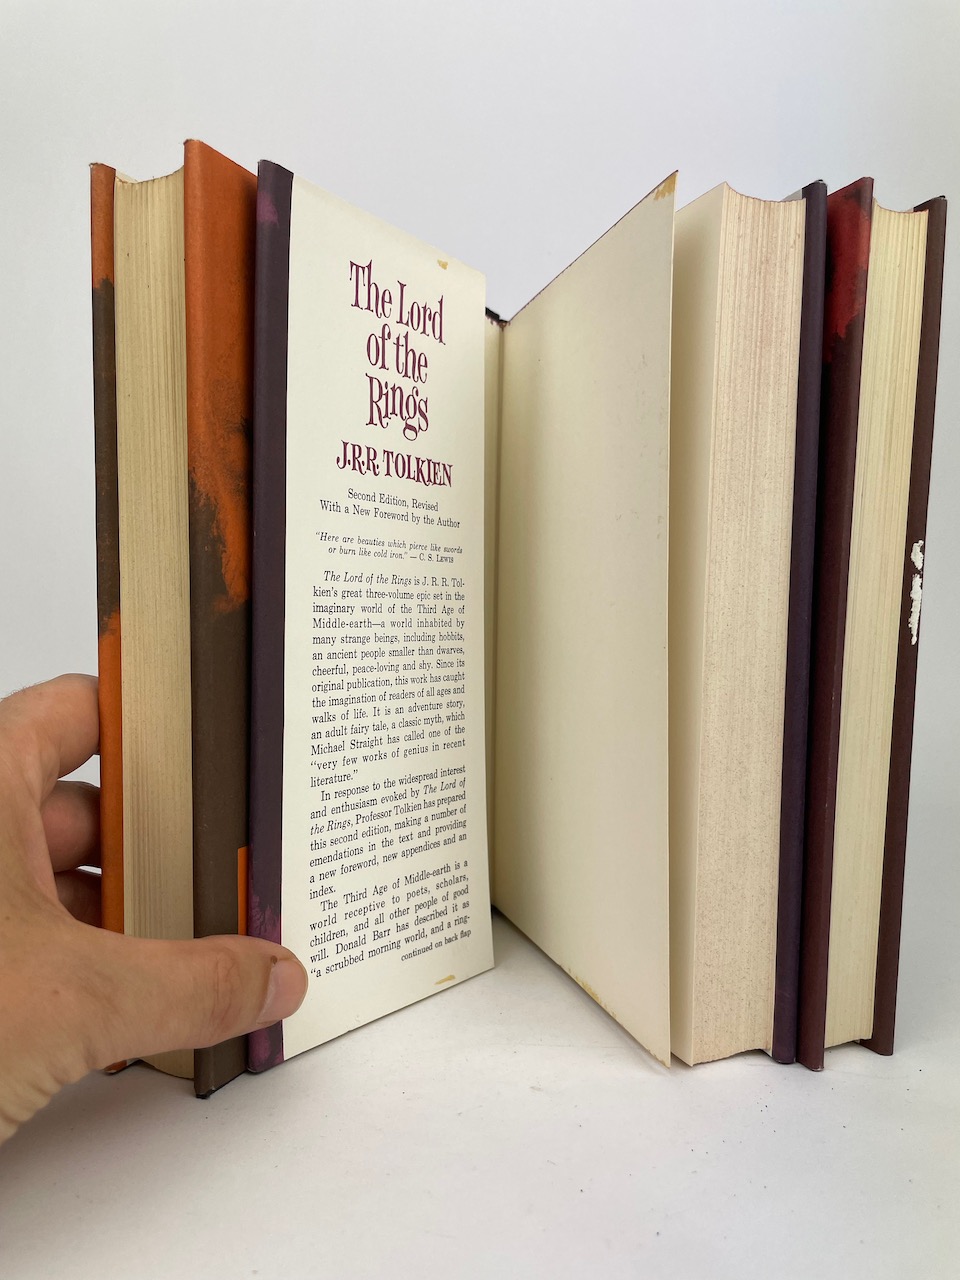 The Lord of the Rings, 2nd US Edition in Original Publishers Slipcase 9th/8th/8th 12